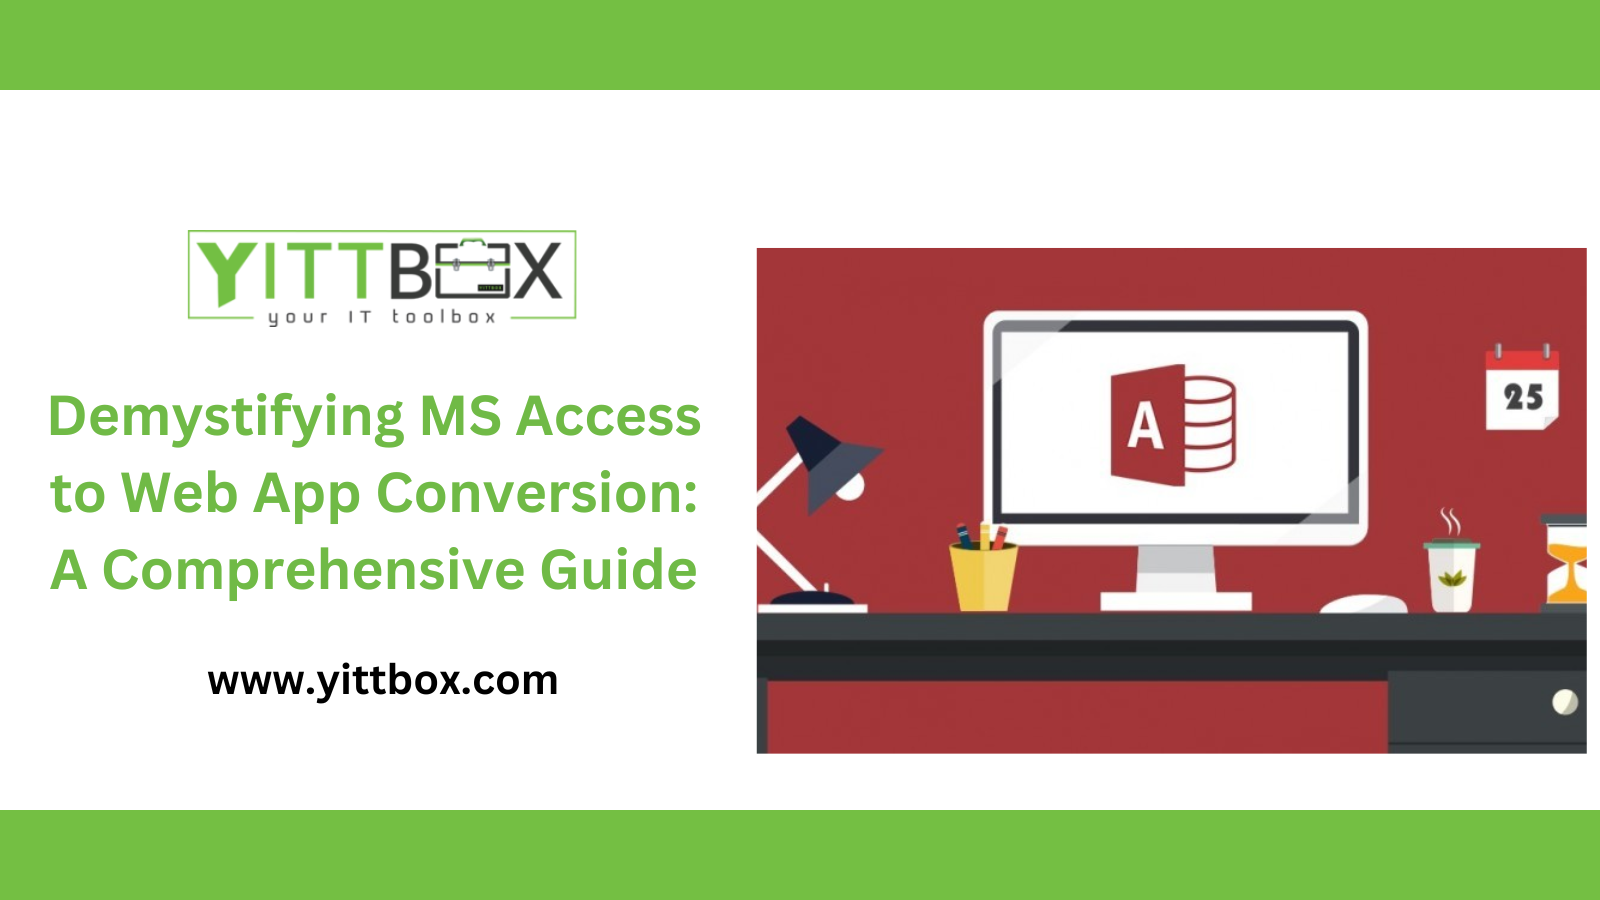 Demystifying MS Access to Web App Conversion: A Comprehensive Guide